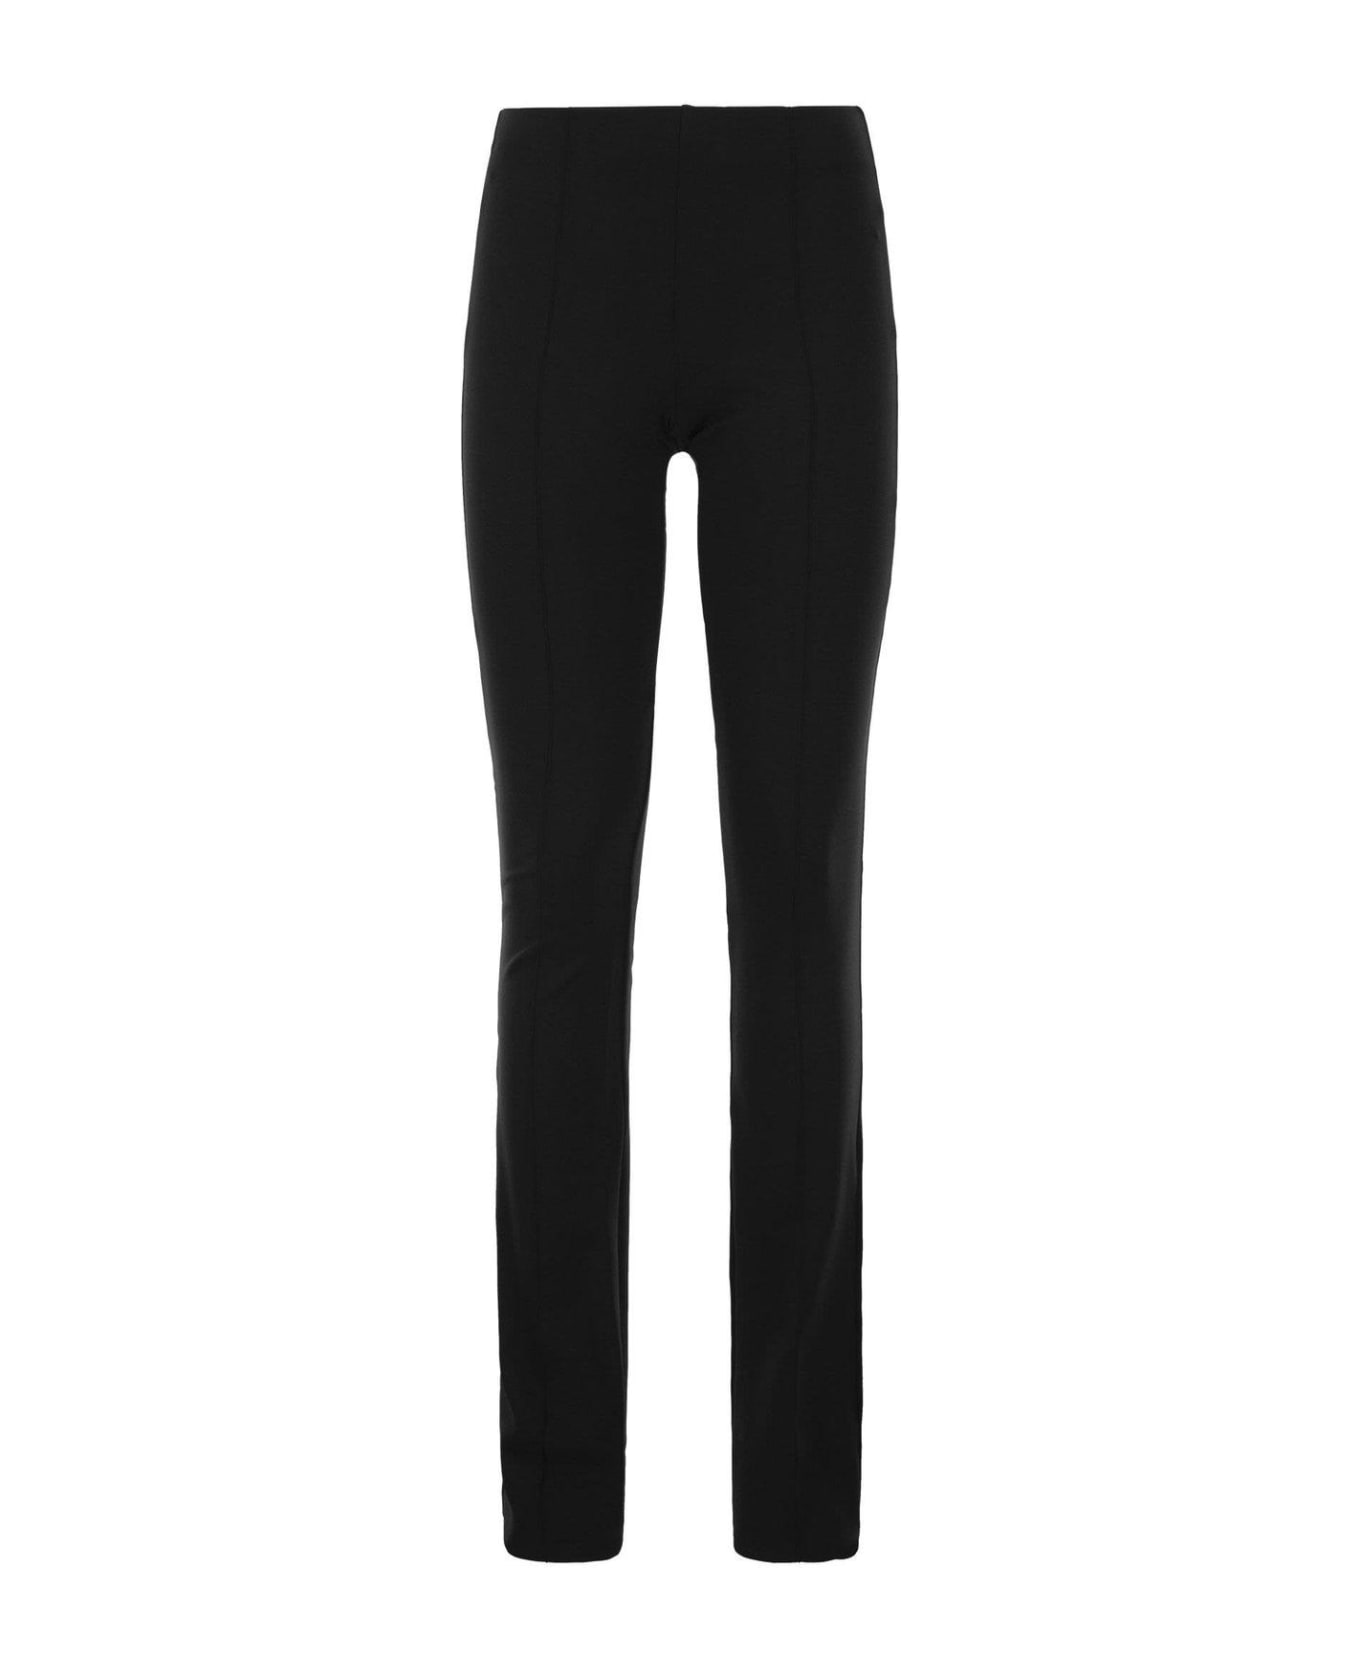 SportMax Mid-rise Flared Trousers - Nero ボトムス